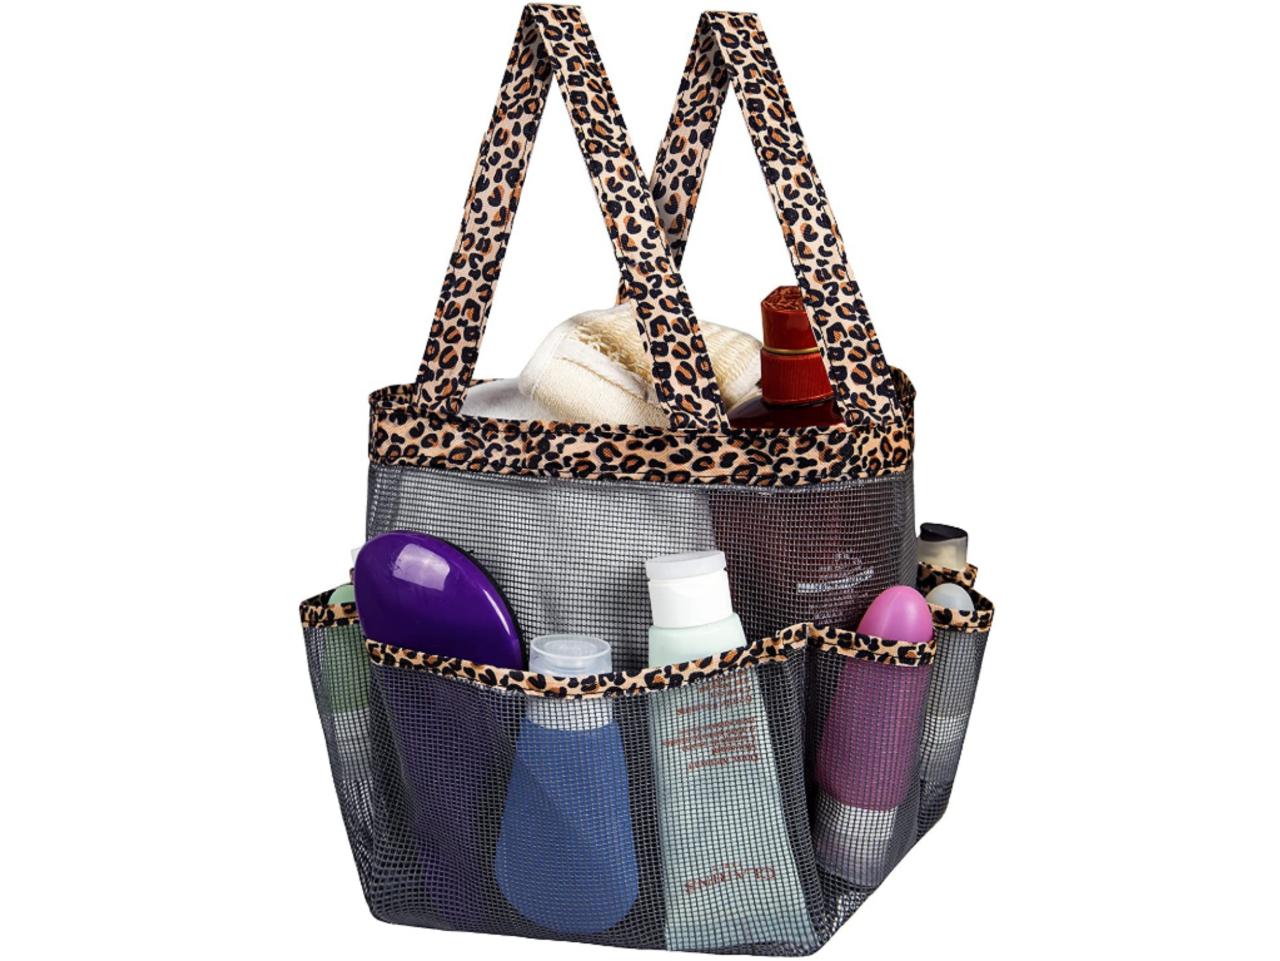 Happy Date Shower Caddy Basket, Portable Shower Tote, Dorm College